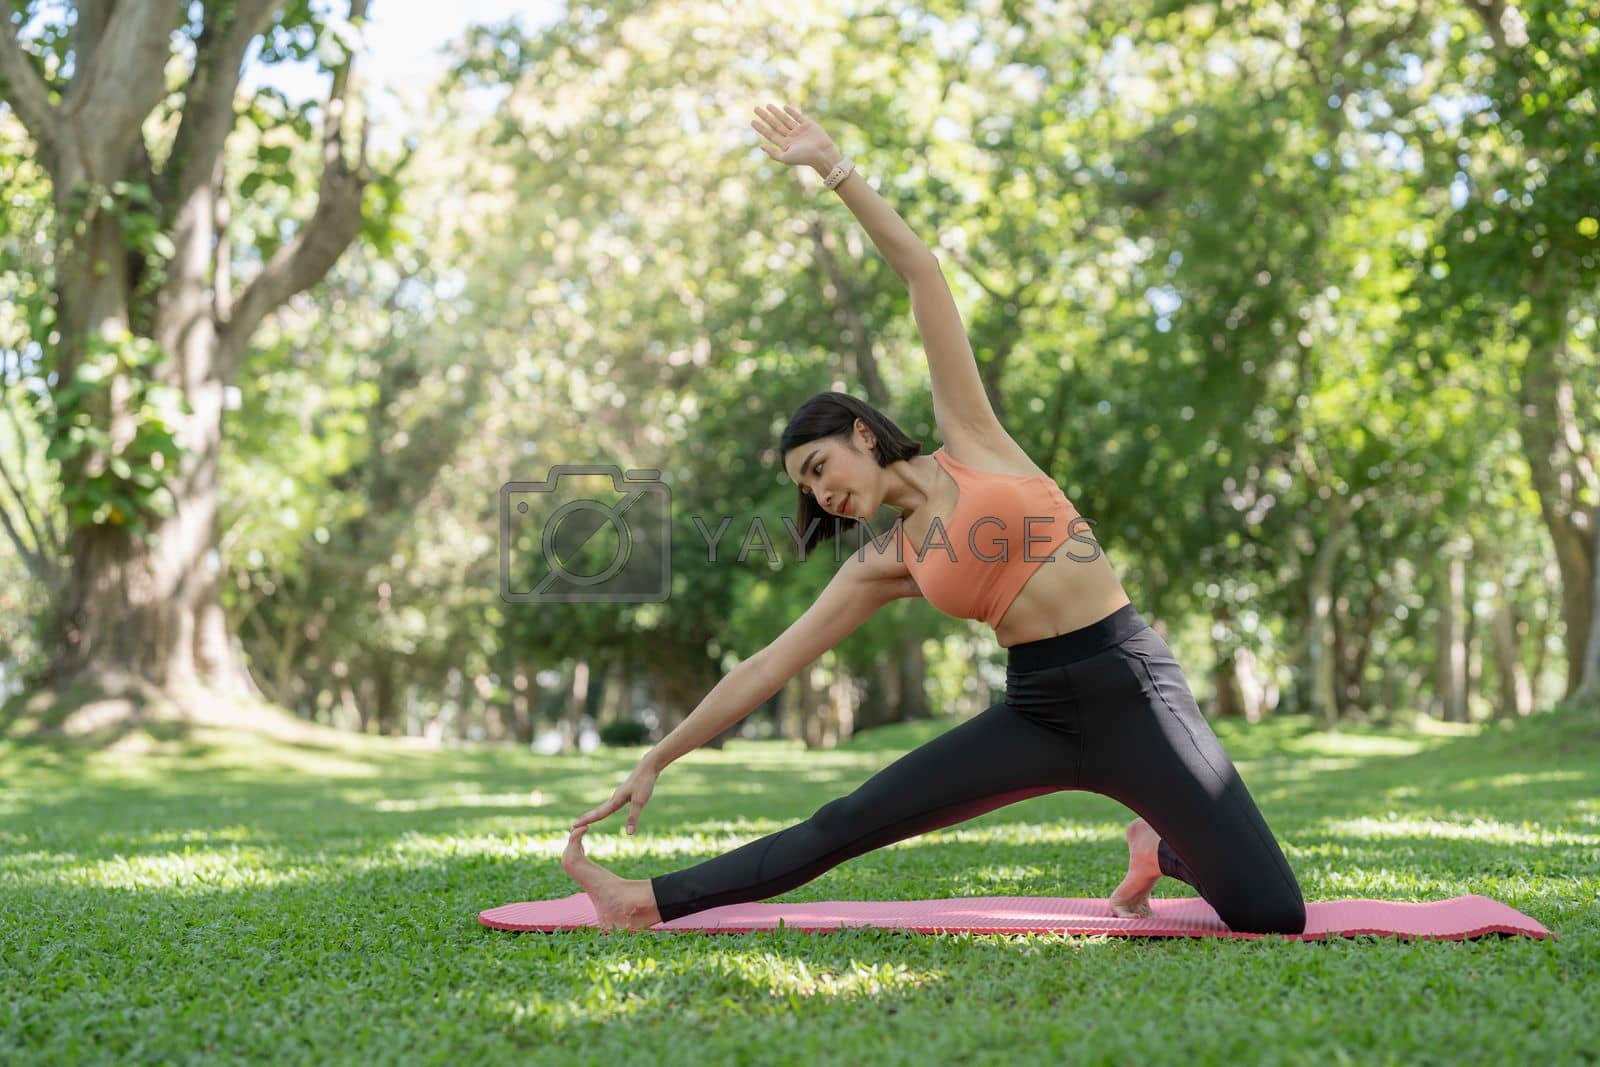 Royalty free image of Young attractive girl is doing advanced yoga asana on the fitness mat in the middle of a park. by nateemee